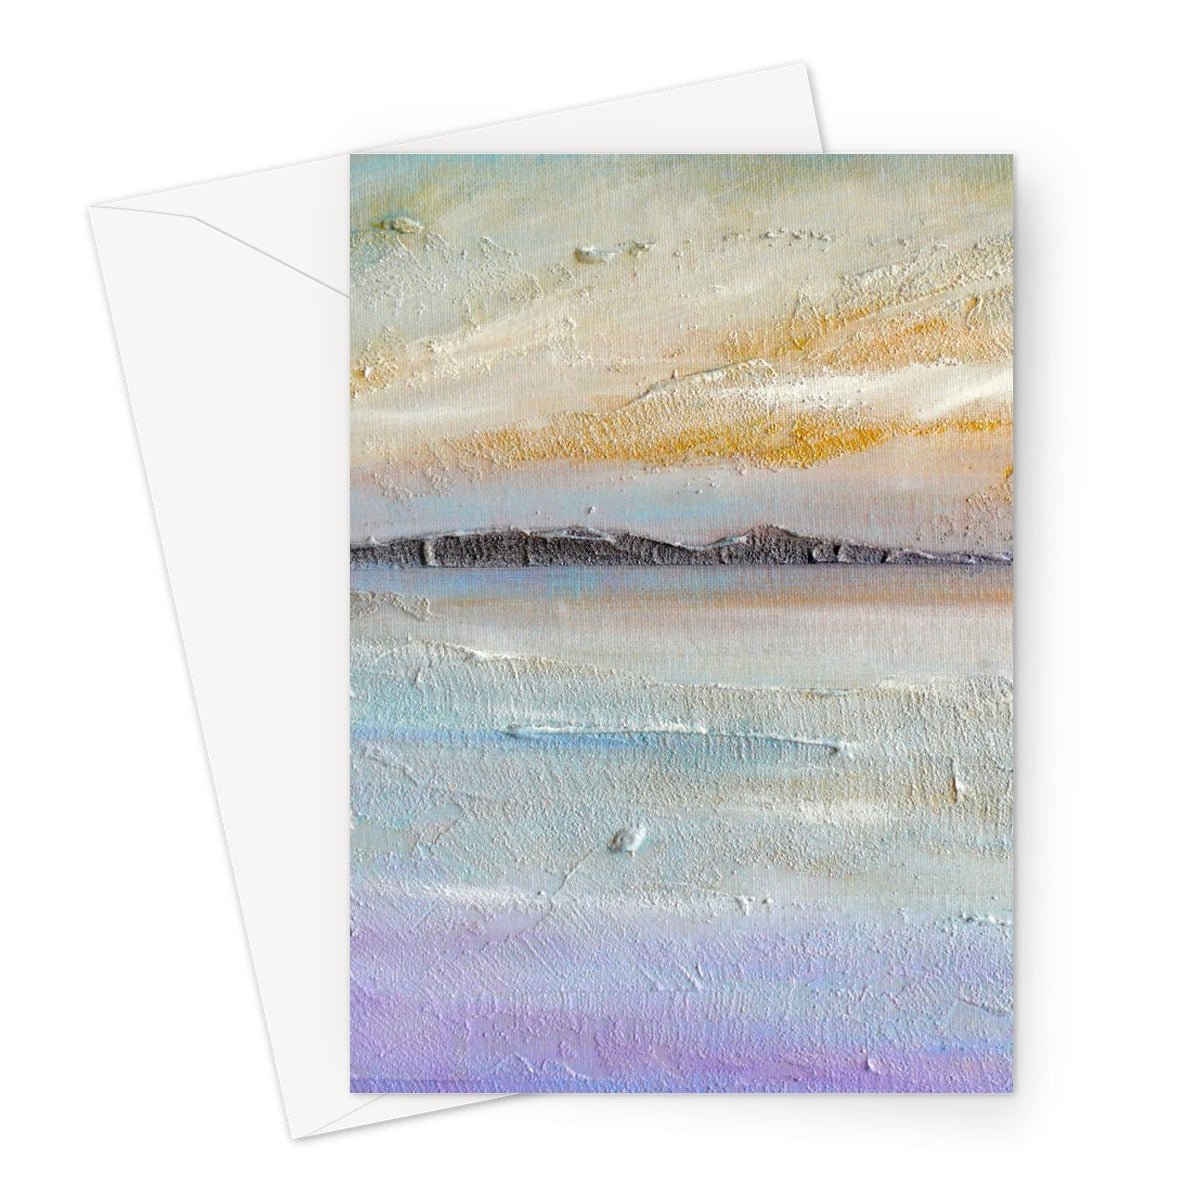 Sollas Beach South Uist Art Gifts Greeting Card-Greetings Cards-Hebridean Islands Art Gallery-A5 Portrait-10 Cards-Paintings, Prints, Homeware, Art Gifts From Scotland By Scottish Artist Kevin Hunter